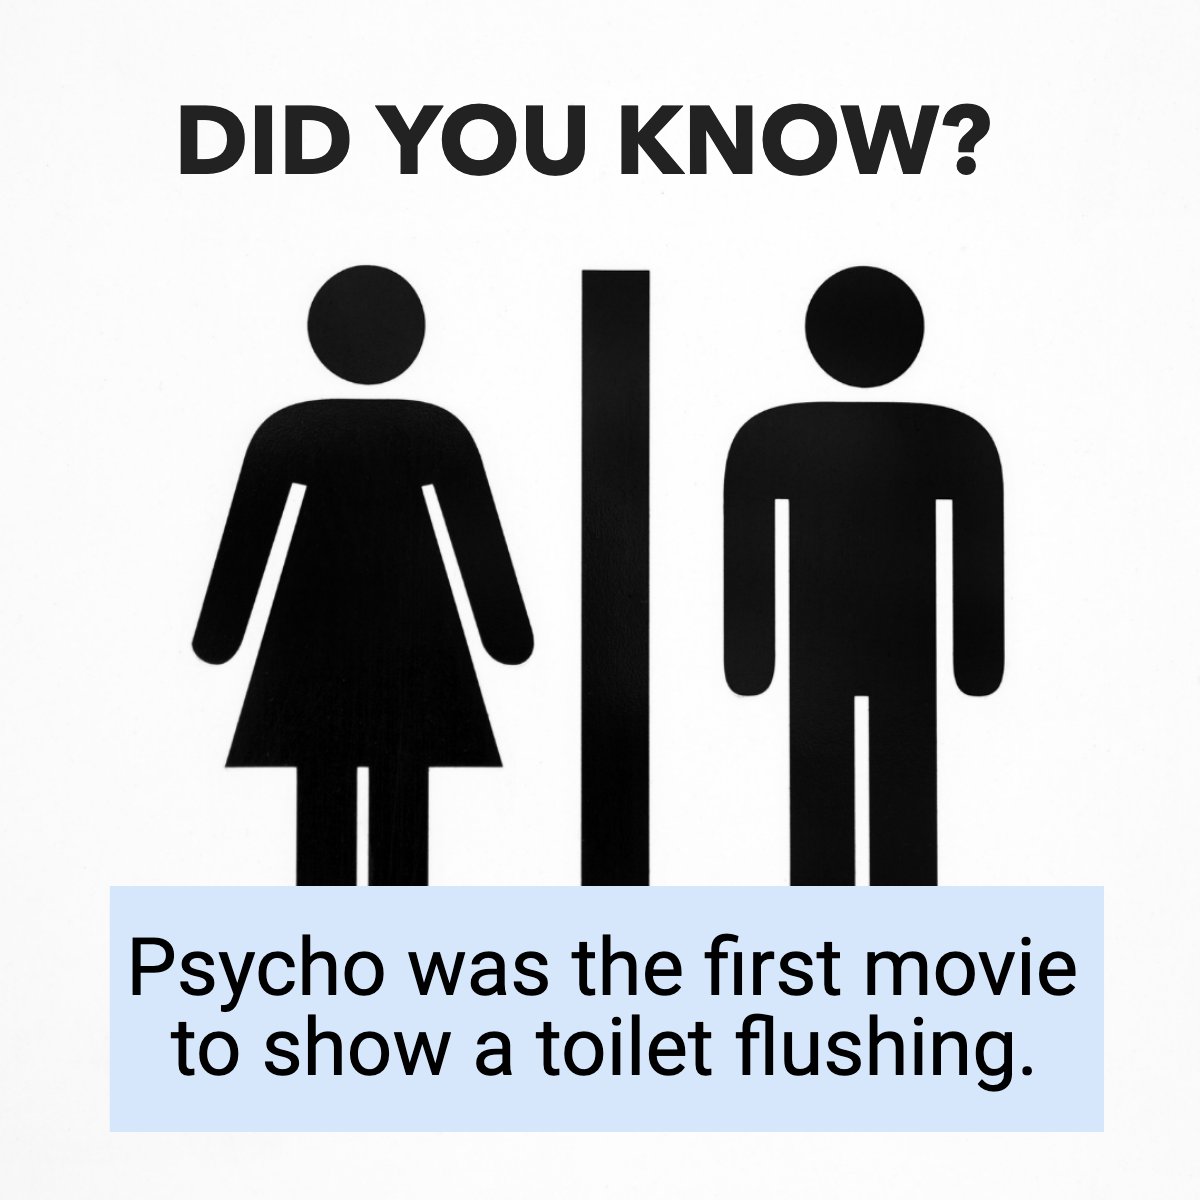 Psycho is an iconic movie that is still considered and viewed as a classic. 

But did you know?

Psycho was the first movie to show a toilet flushing. 

#actualinstagramhomes #firsttimebuyer #actualhomesofinstagram #newbuildhouse #interiordesign #nexthome #homedesign